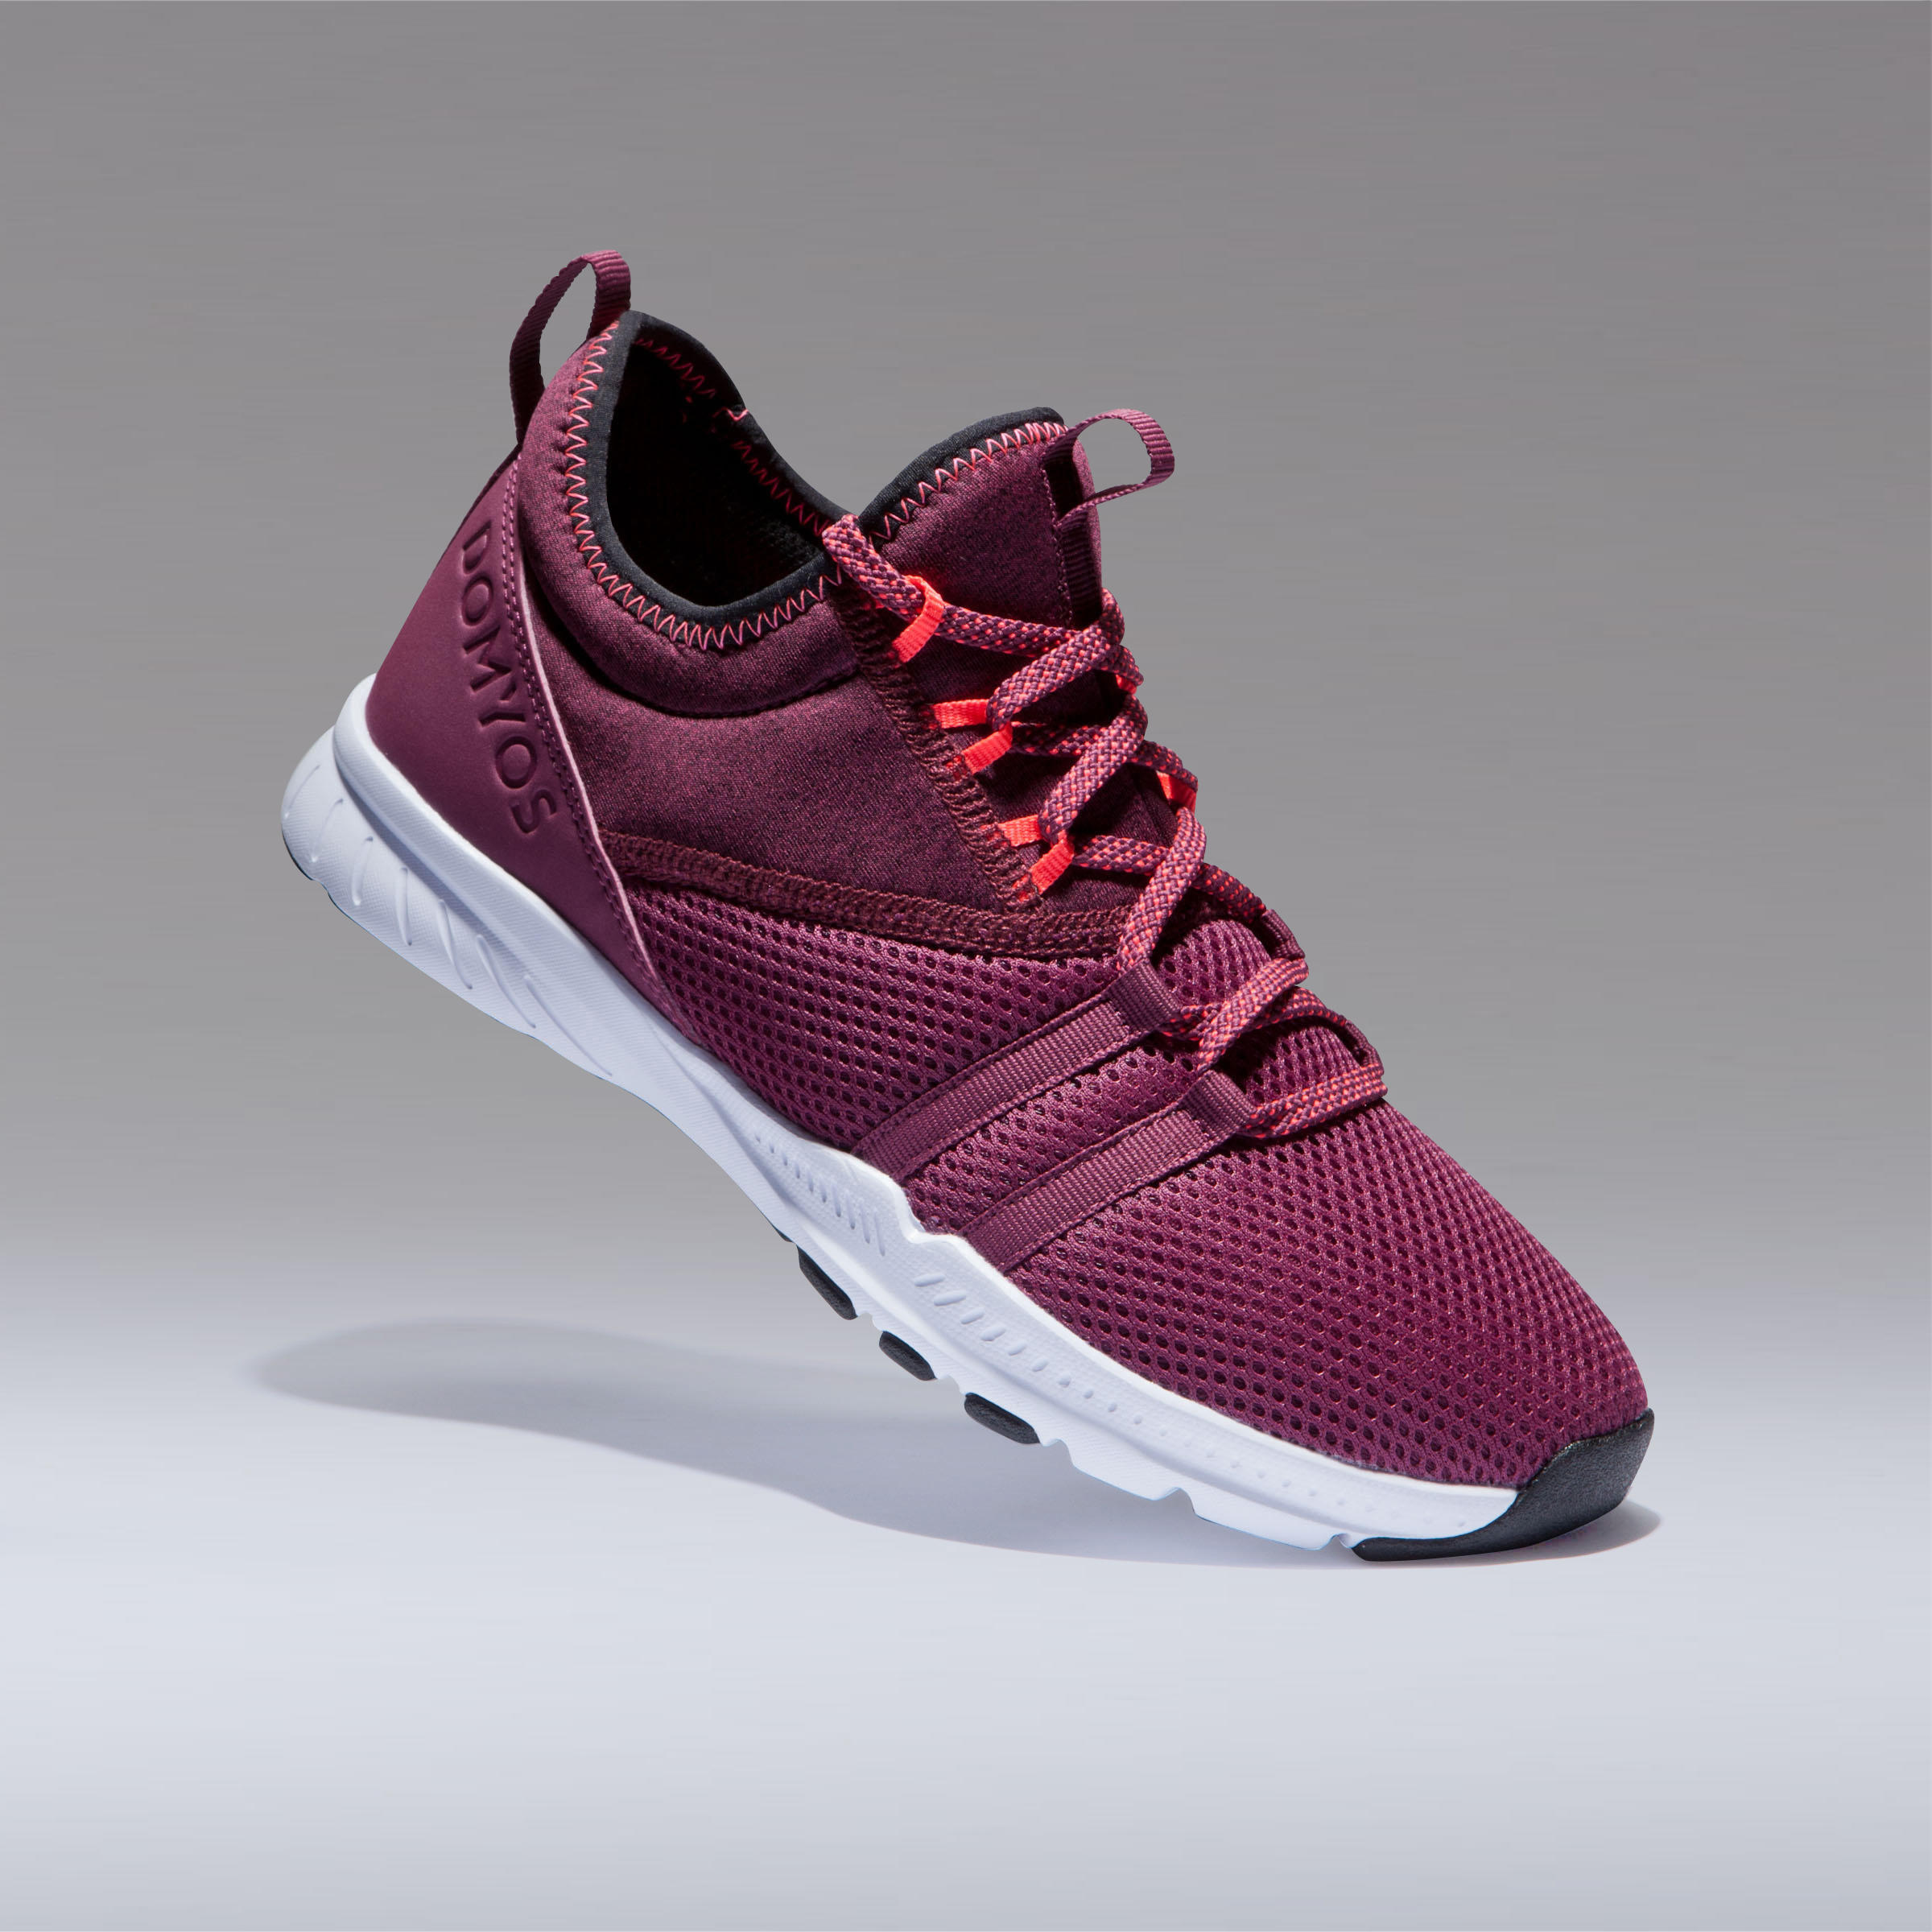 Women's Fitness Shoes 120 Mid - Burgundy 9/16